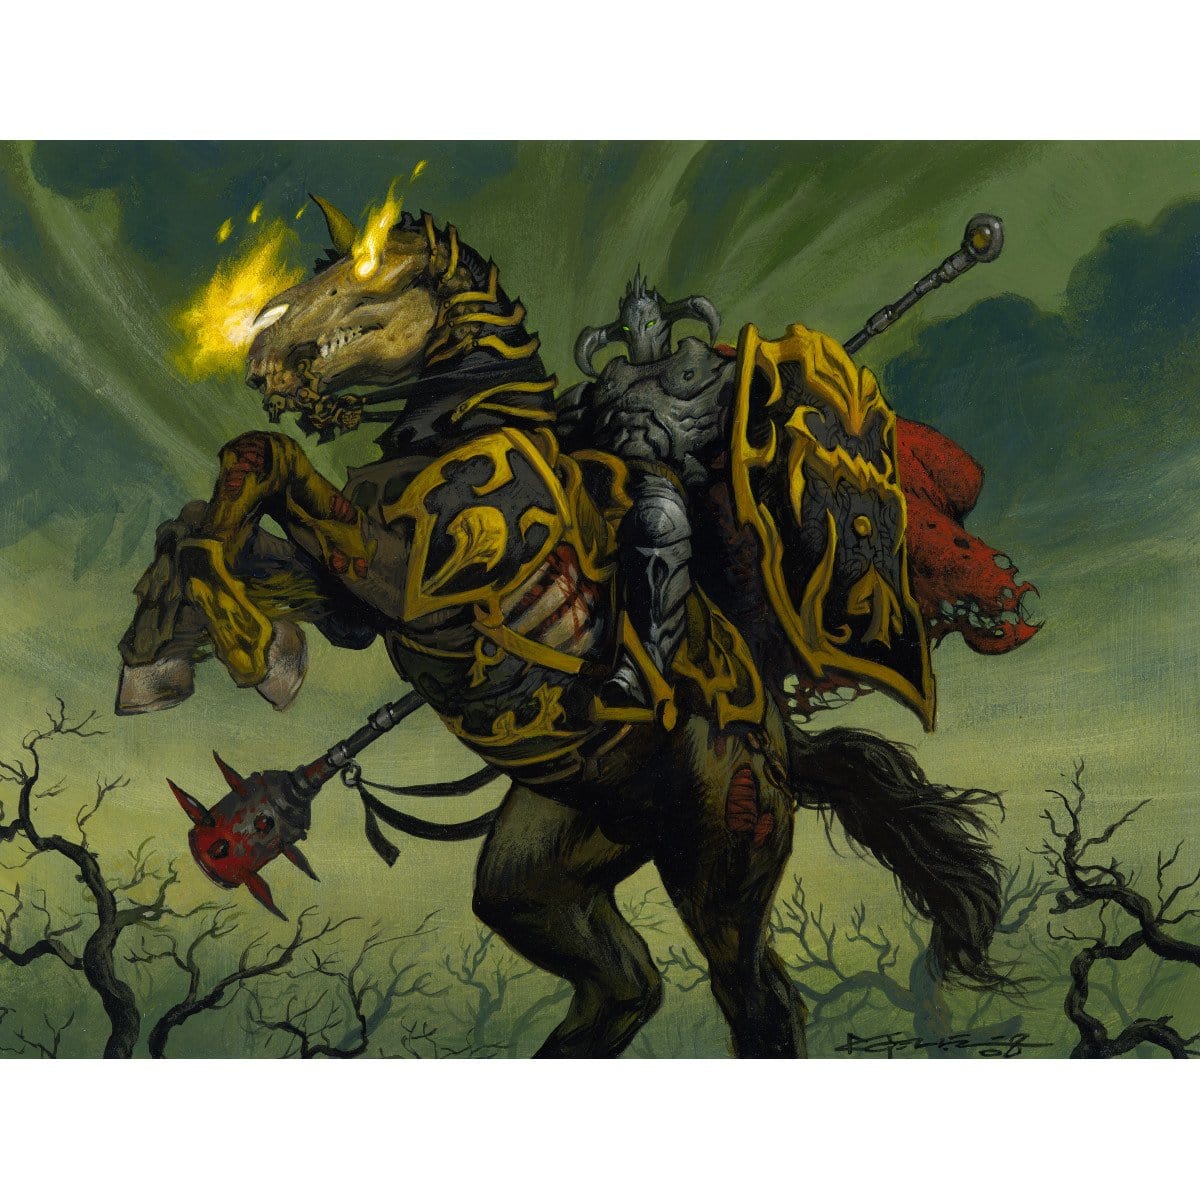 Black Knight Print - Print - Original Magic Art - Accessories for Magic the Gathering and other card games